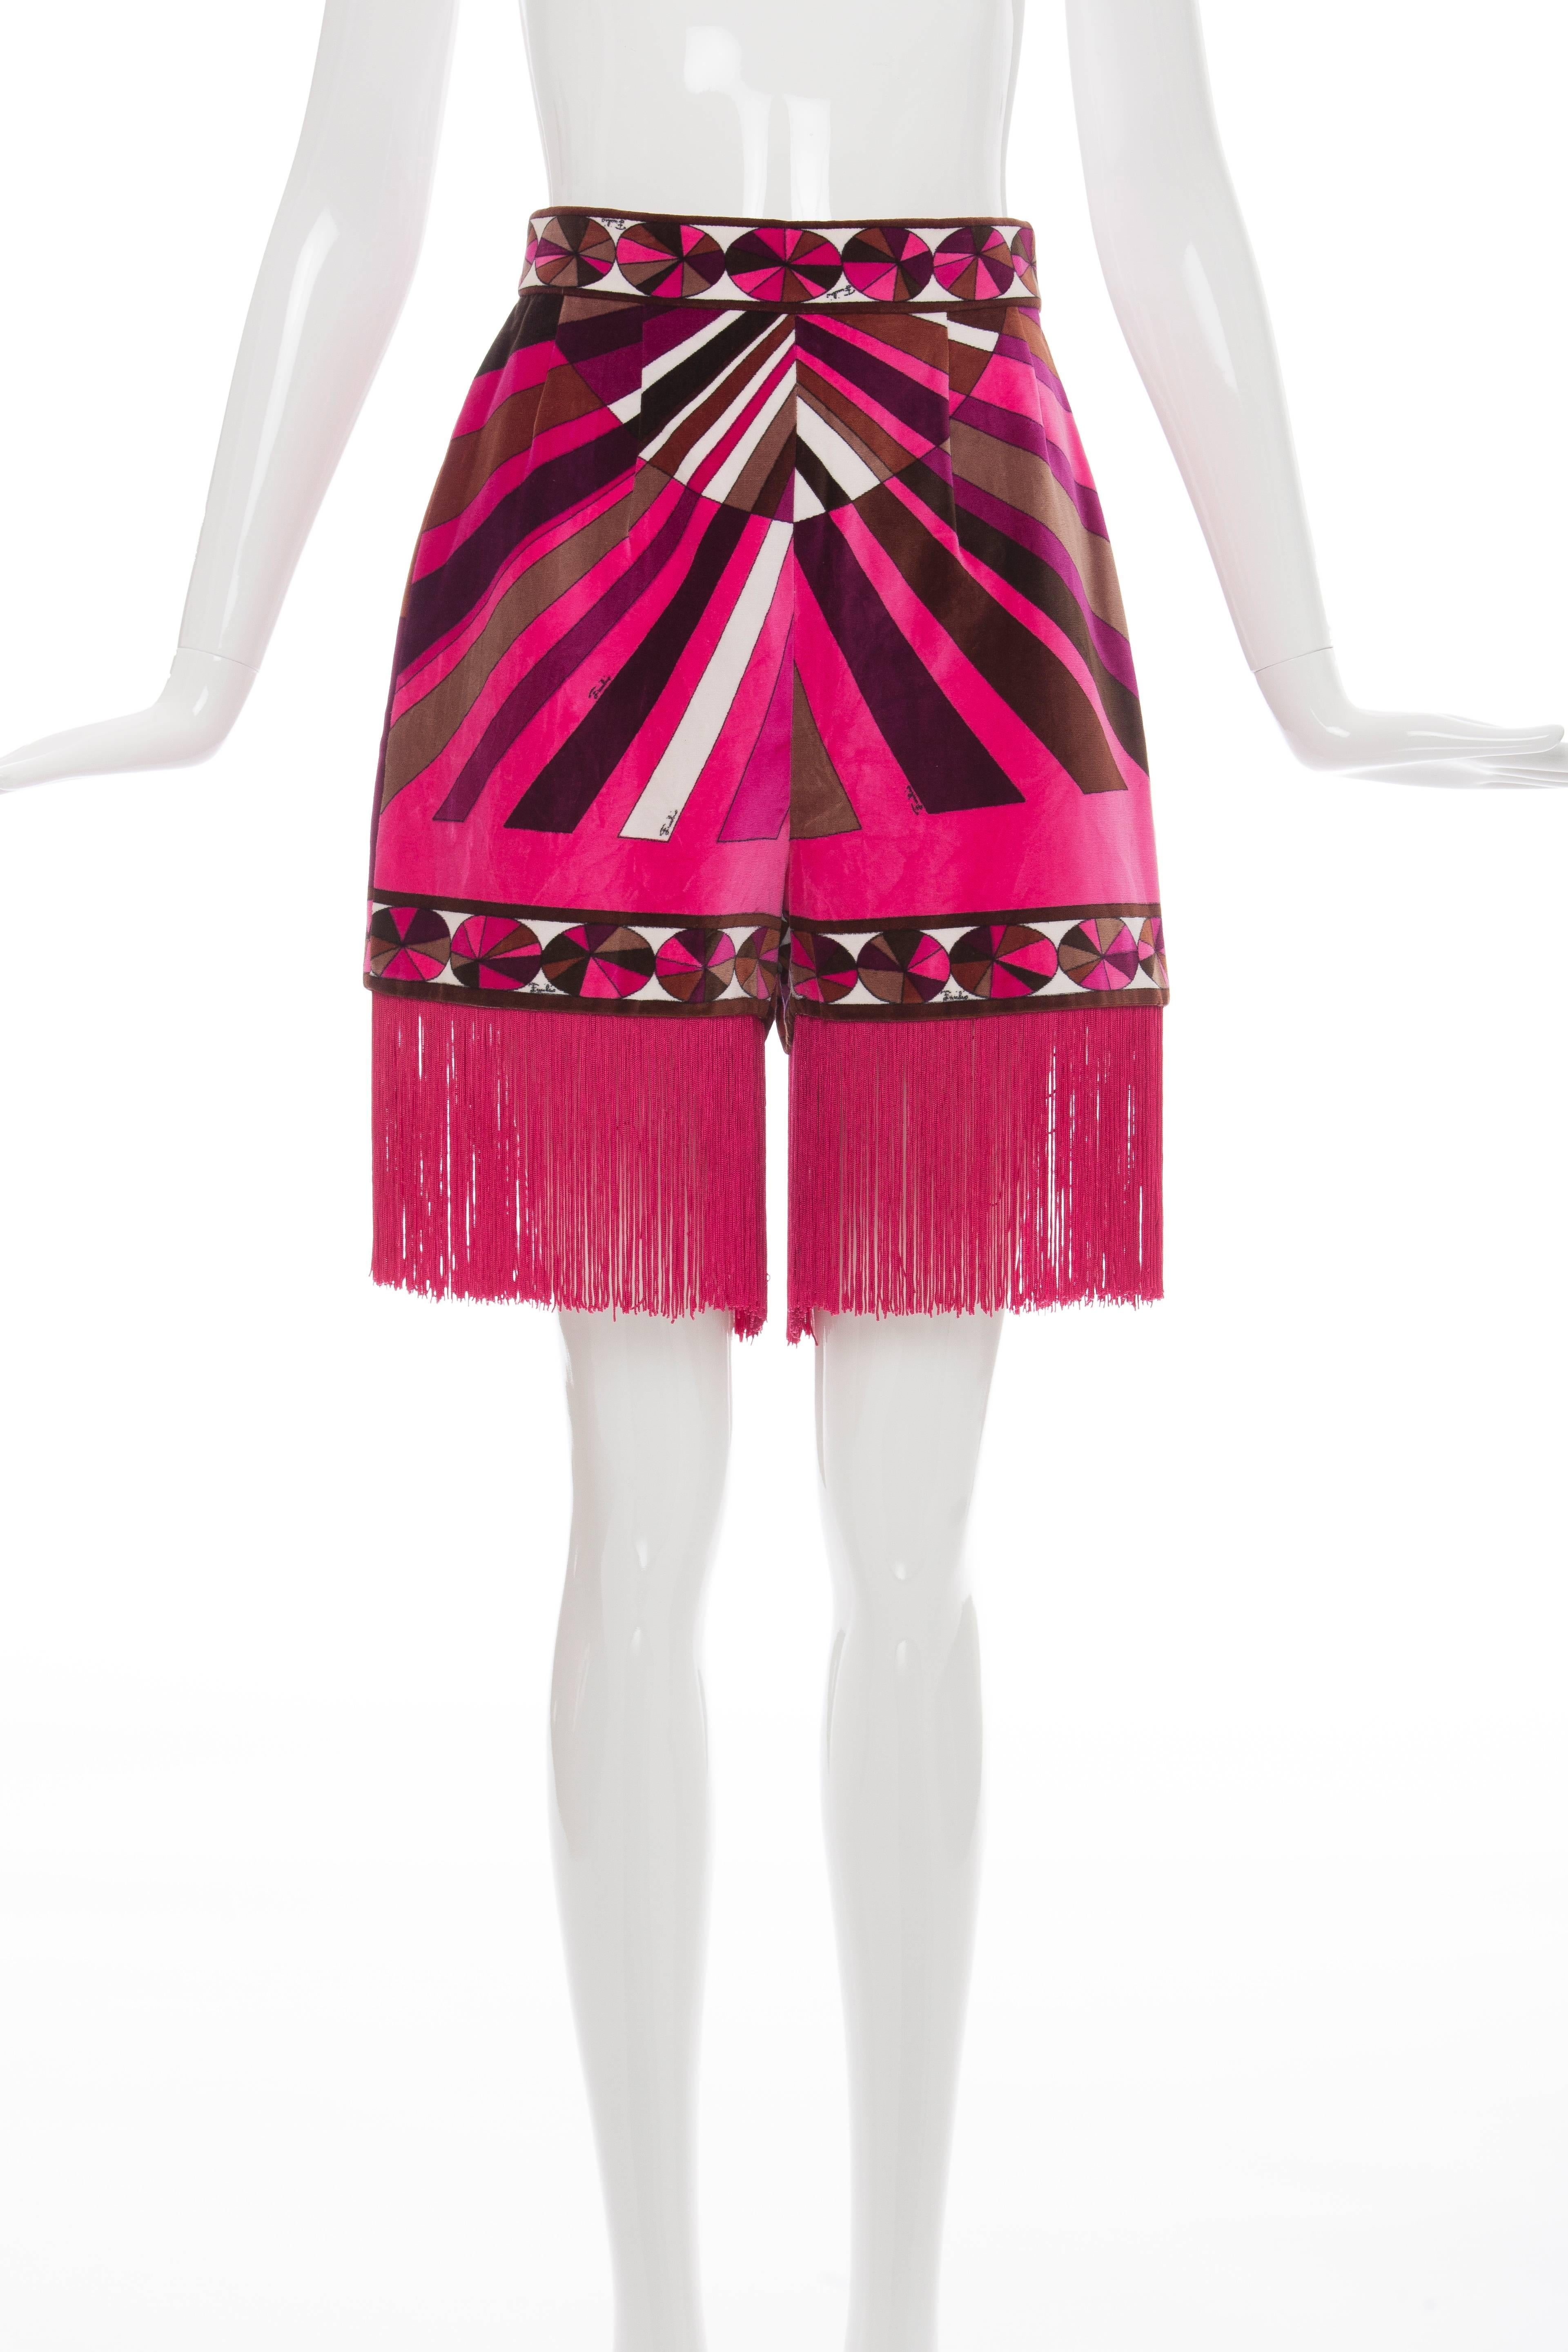 Emilio Pucci, Circa 1970's cotton velveteen high waisted, hot pants with long fringe trim and back zip closure.

26